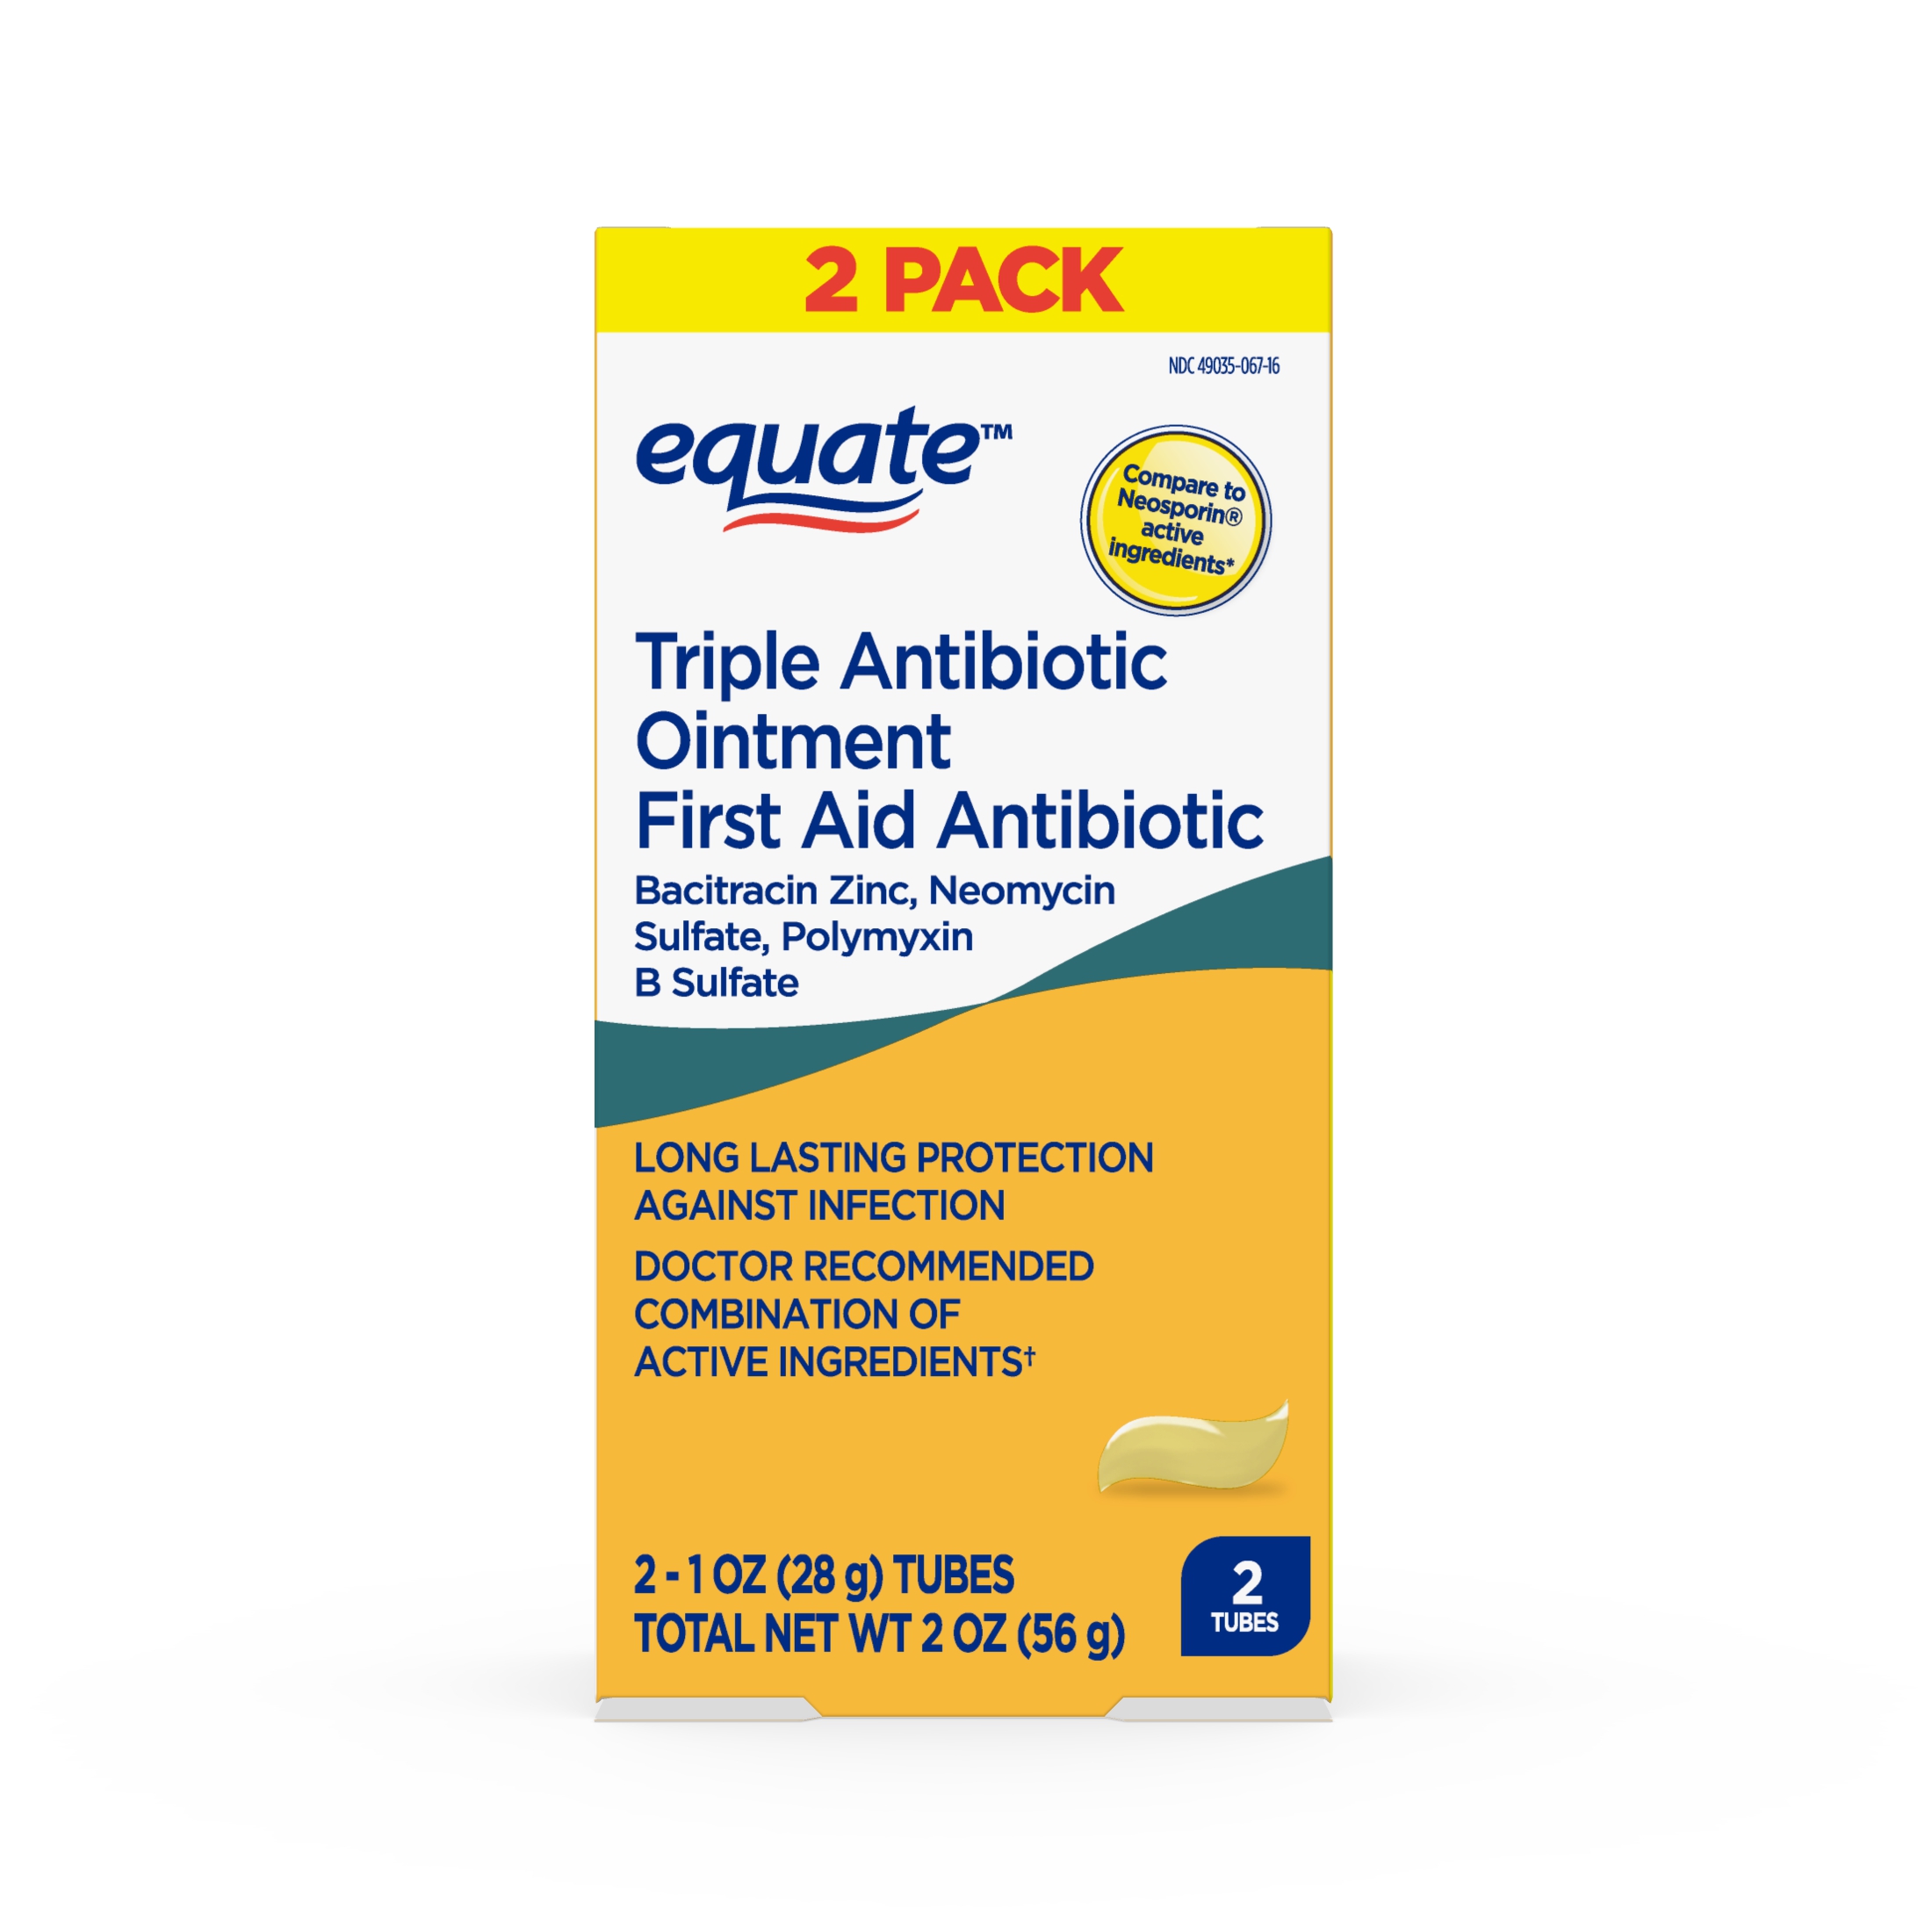 Equate First Aid Triple Antibiotic Ointment, Infection Protection, 2 oz, 2 Pack - image 1 of 7